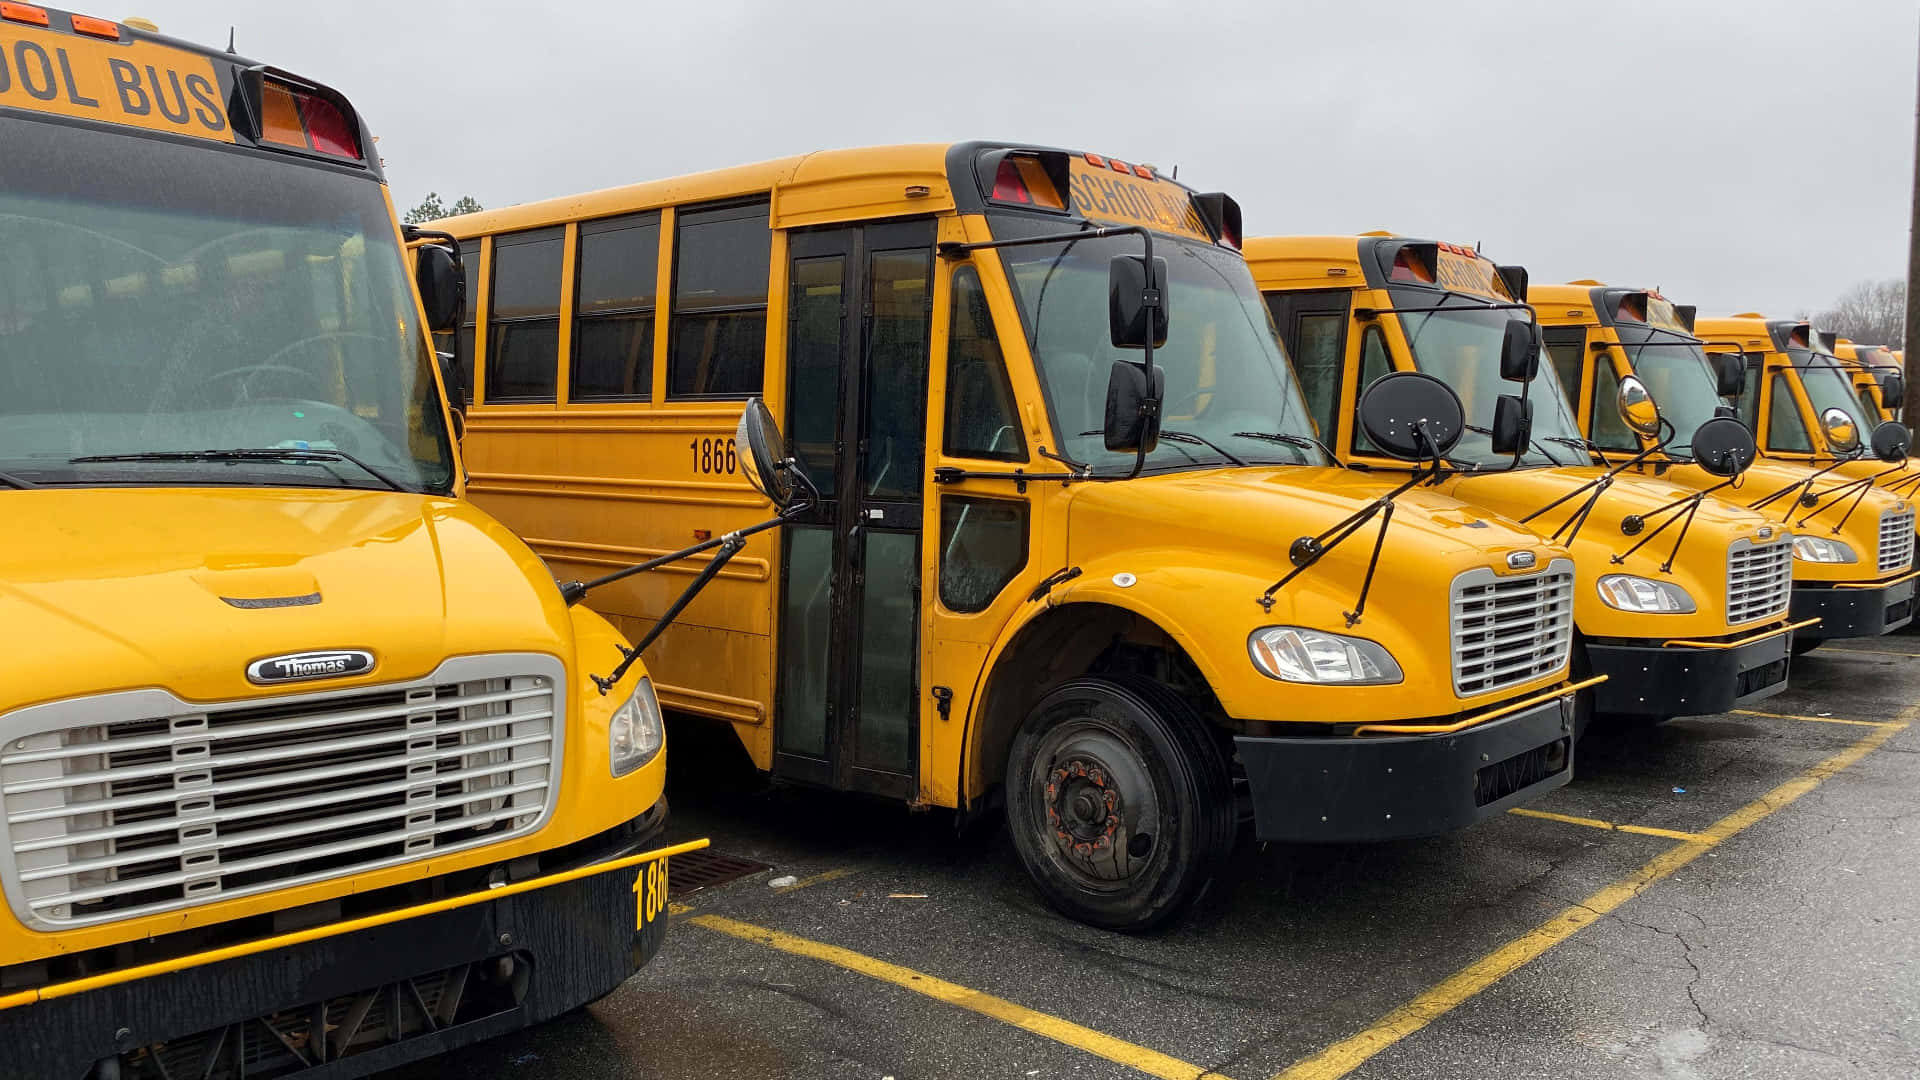 Line of Parked School Buses Wallpaper